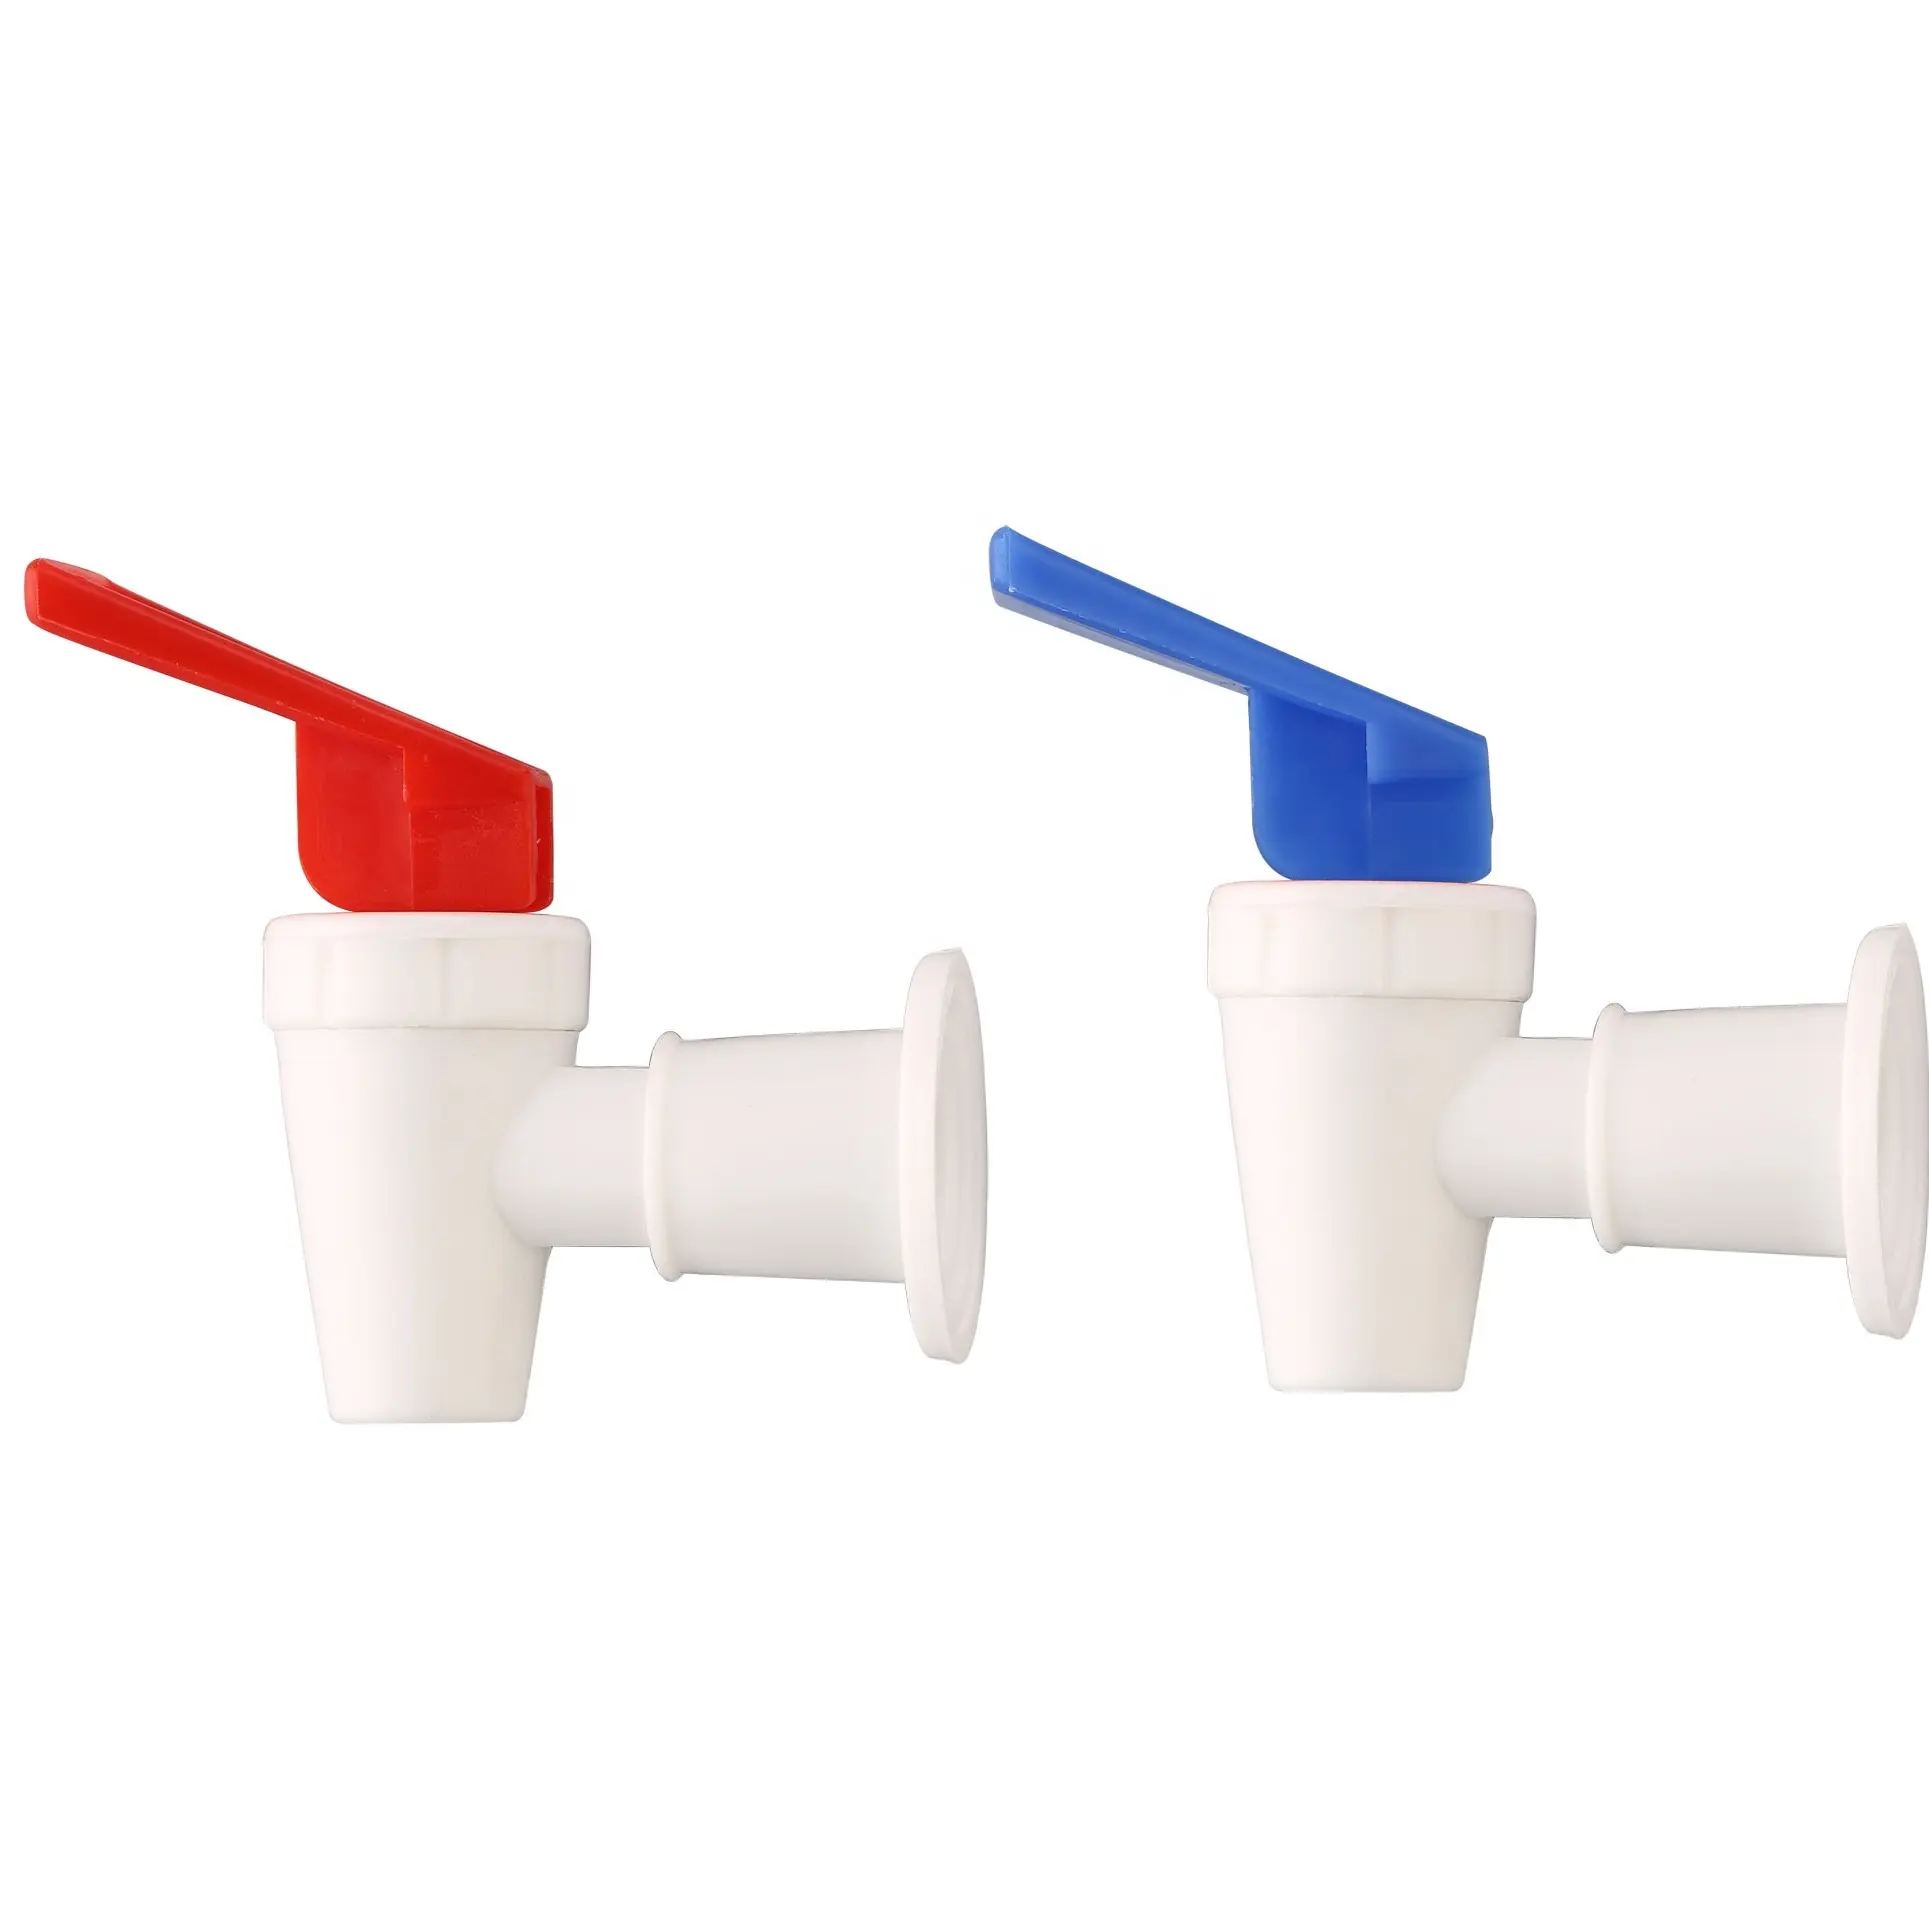 Hot and Cold High Quality Plastic Faucets Taps For Water Dispensers